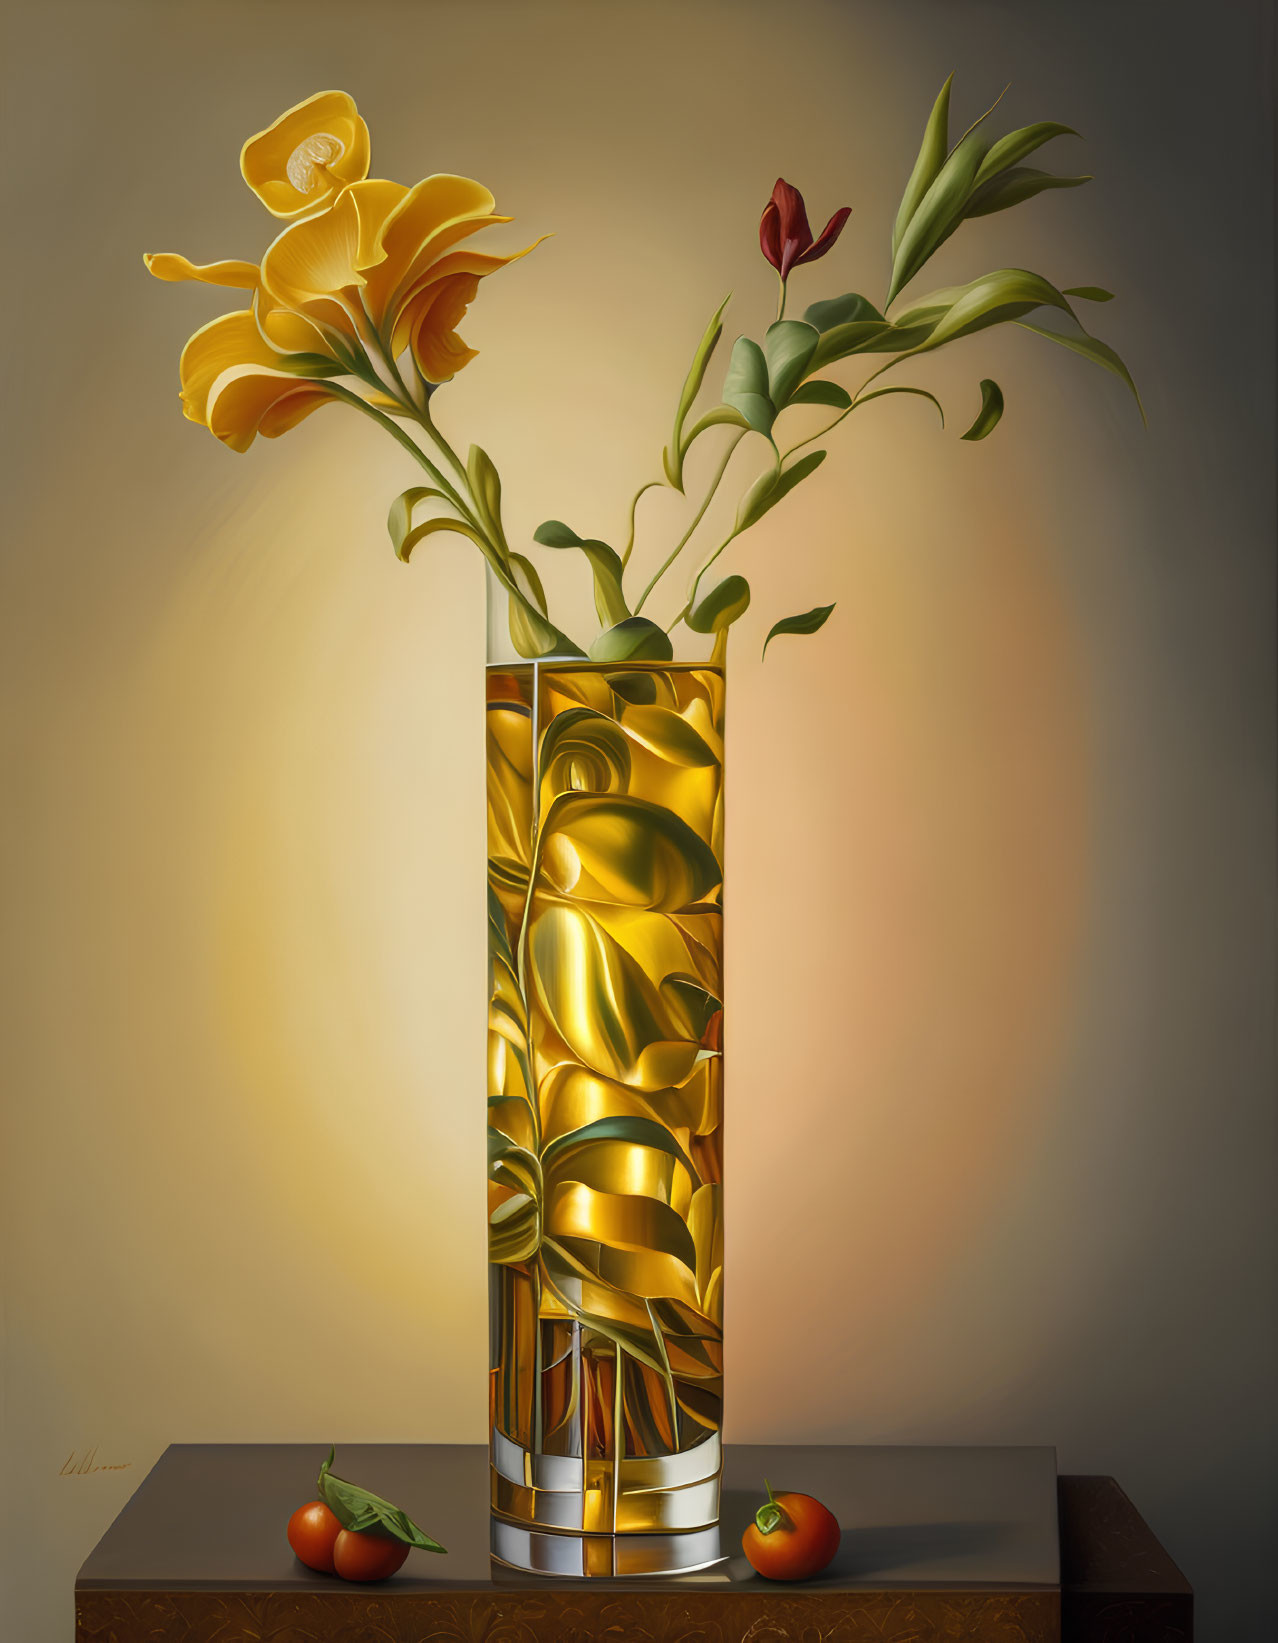 Vase with Yellow Flowers, Chili Peppers, Tomato Still Life Painting